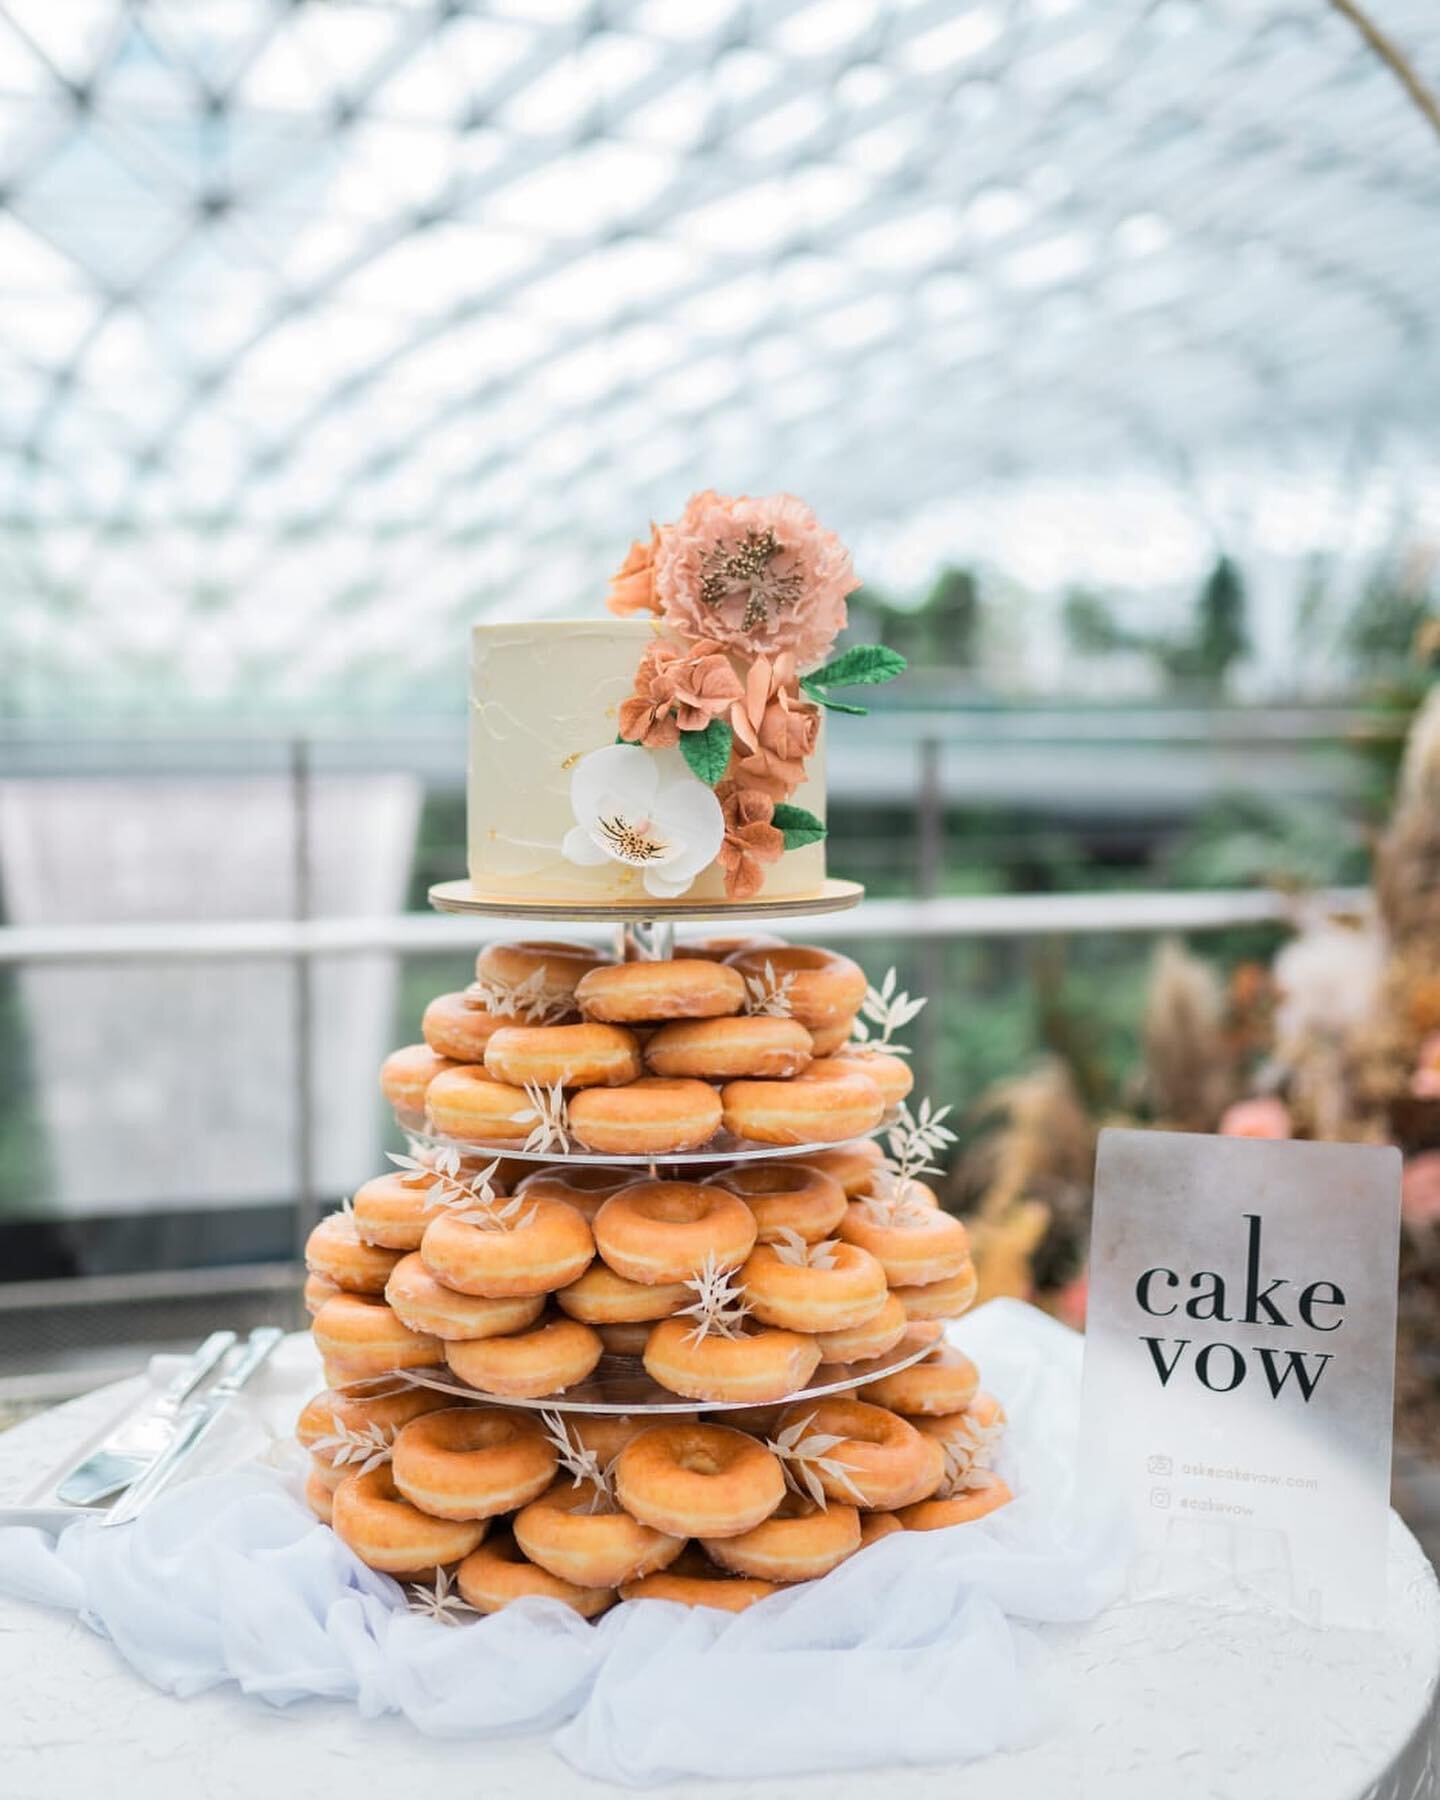 A cake and donut tower, combined into one! This is the best of both worlds 🤩🤤 #CakeVowWeddings